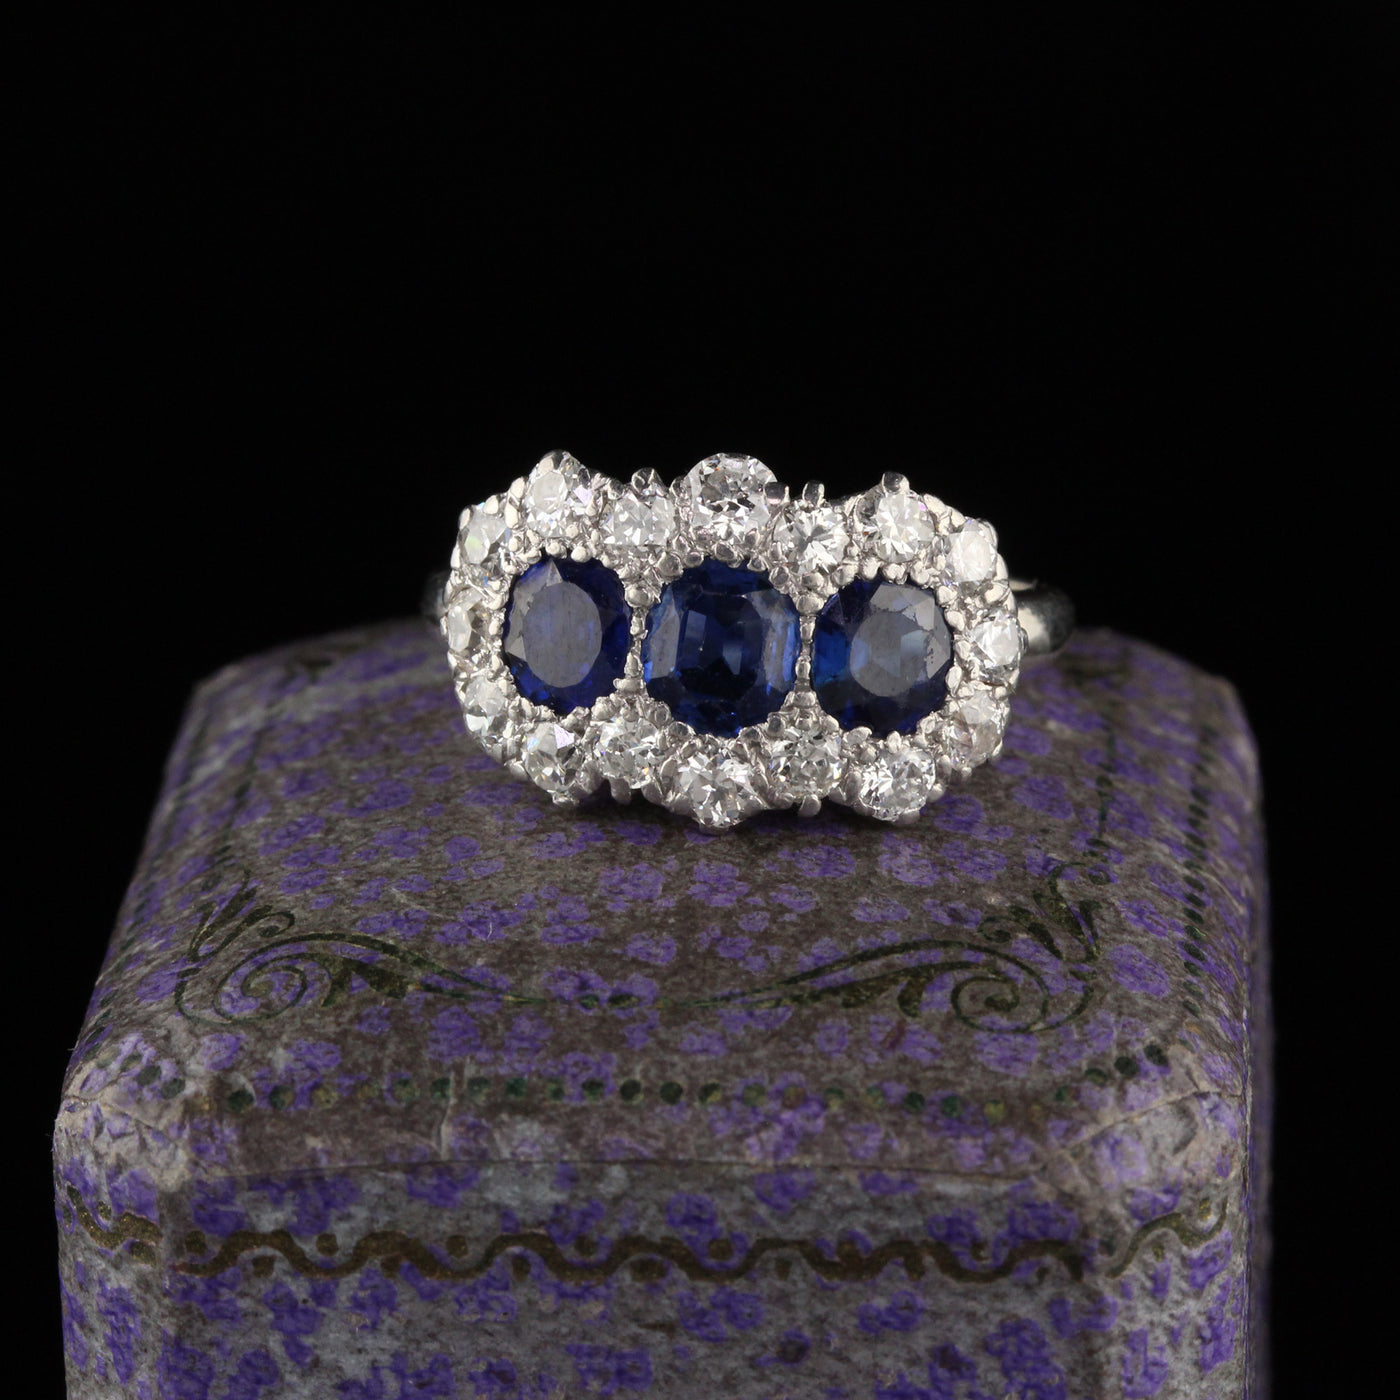 Antique Art Deco Platinum and 14K White Gold Sapphire and Diamond Ring